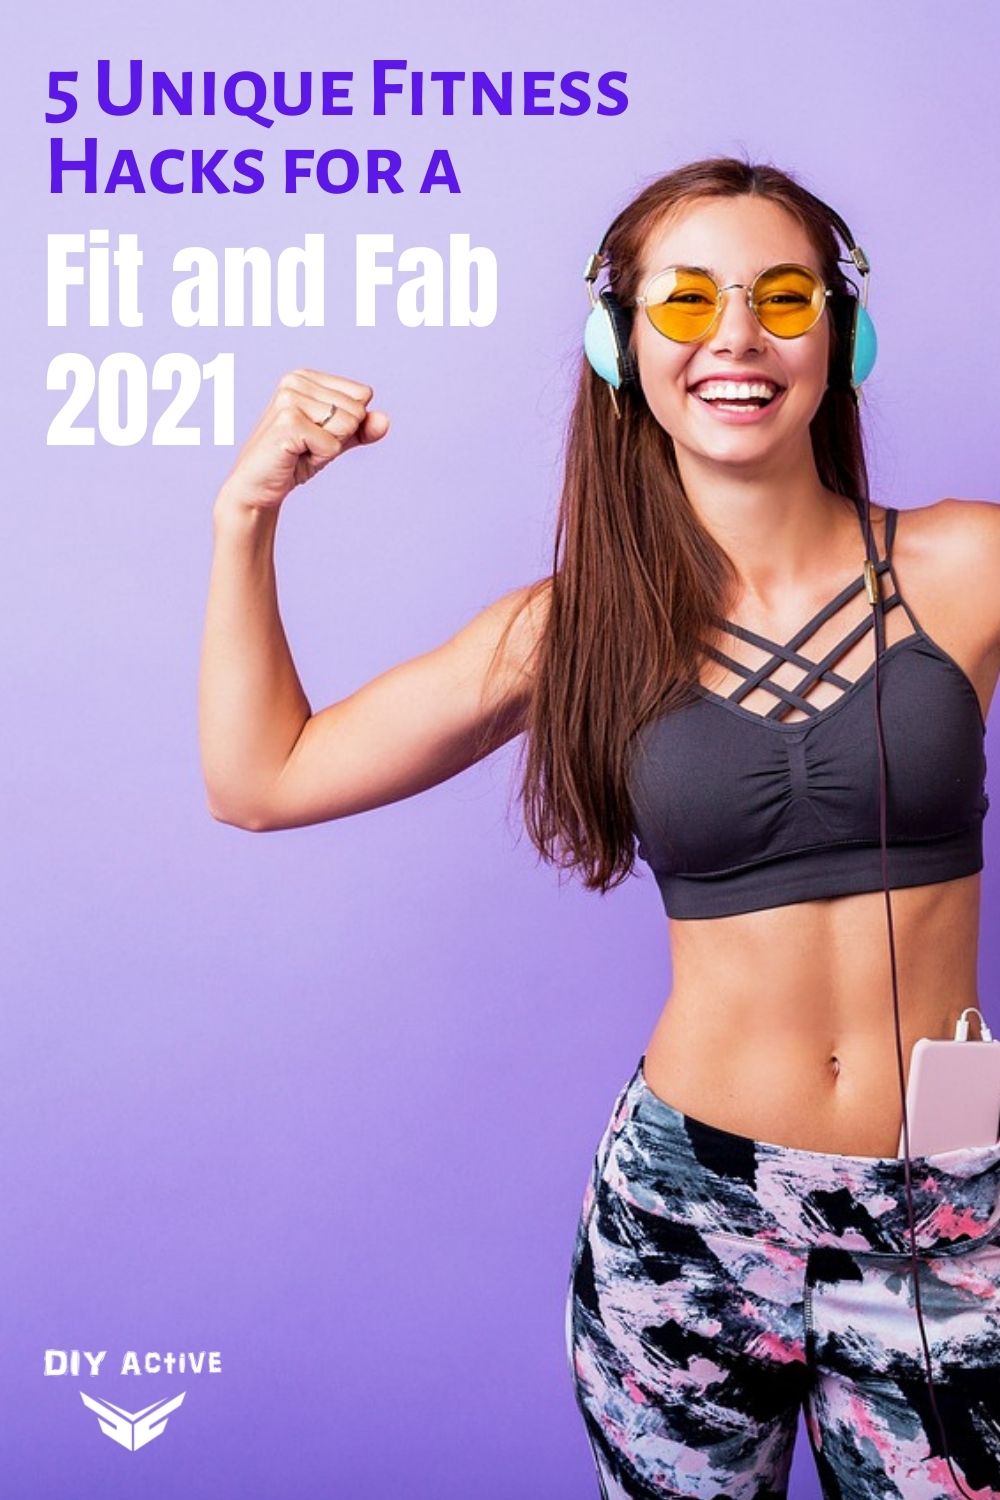 5 Unique Fitness Hacks for a Fab and Fit 2021